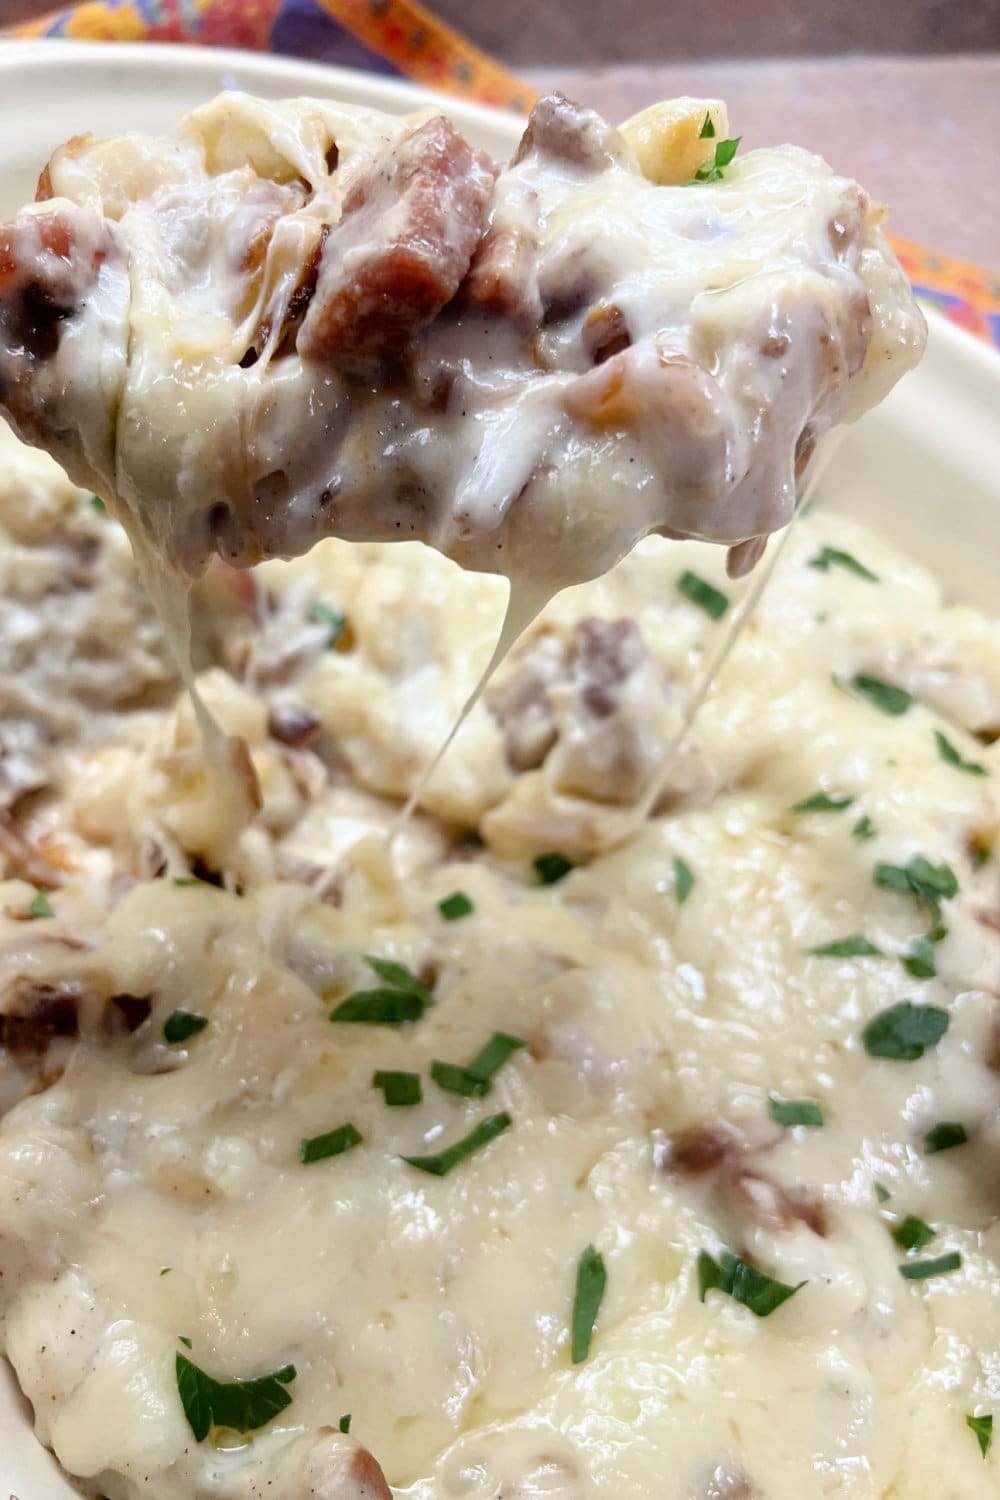 Rich and creamy Ham Steak and Potato Casserole hot from the oven. 